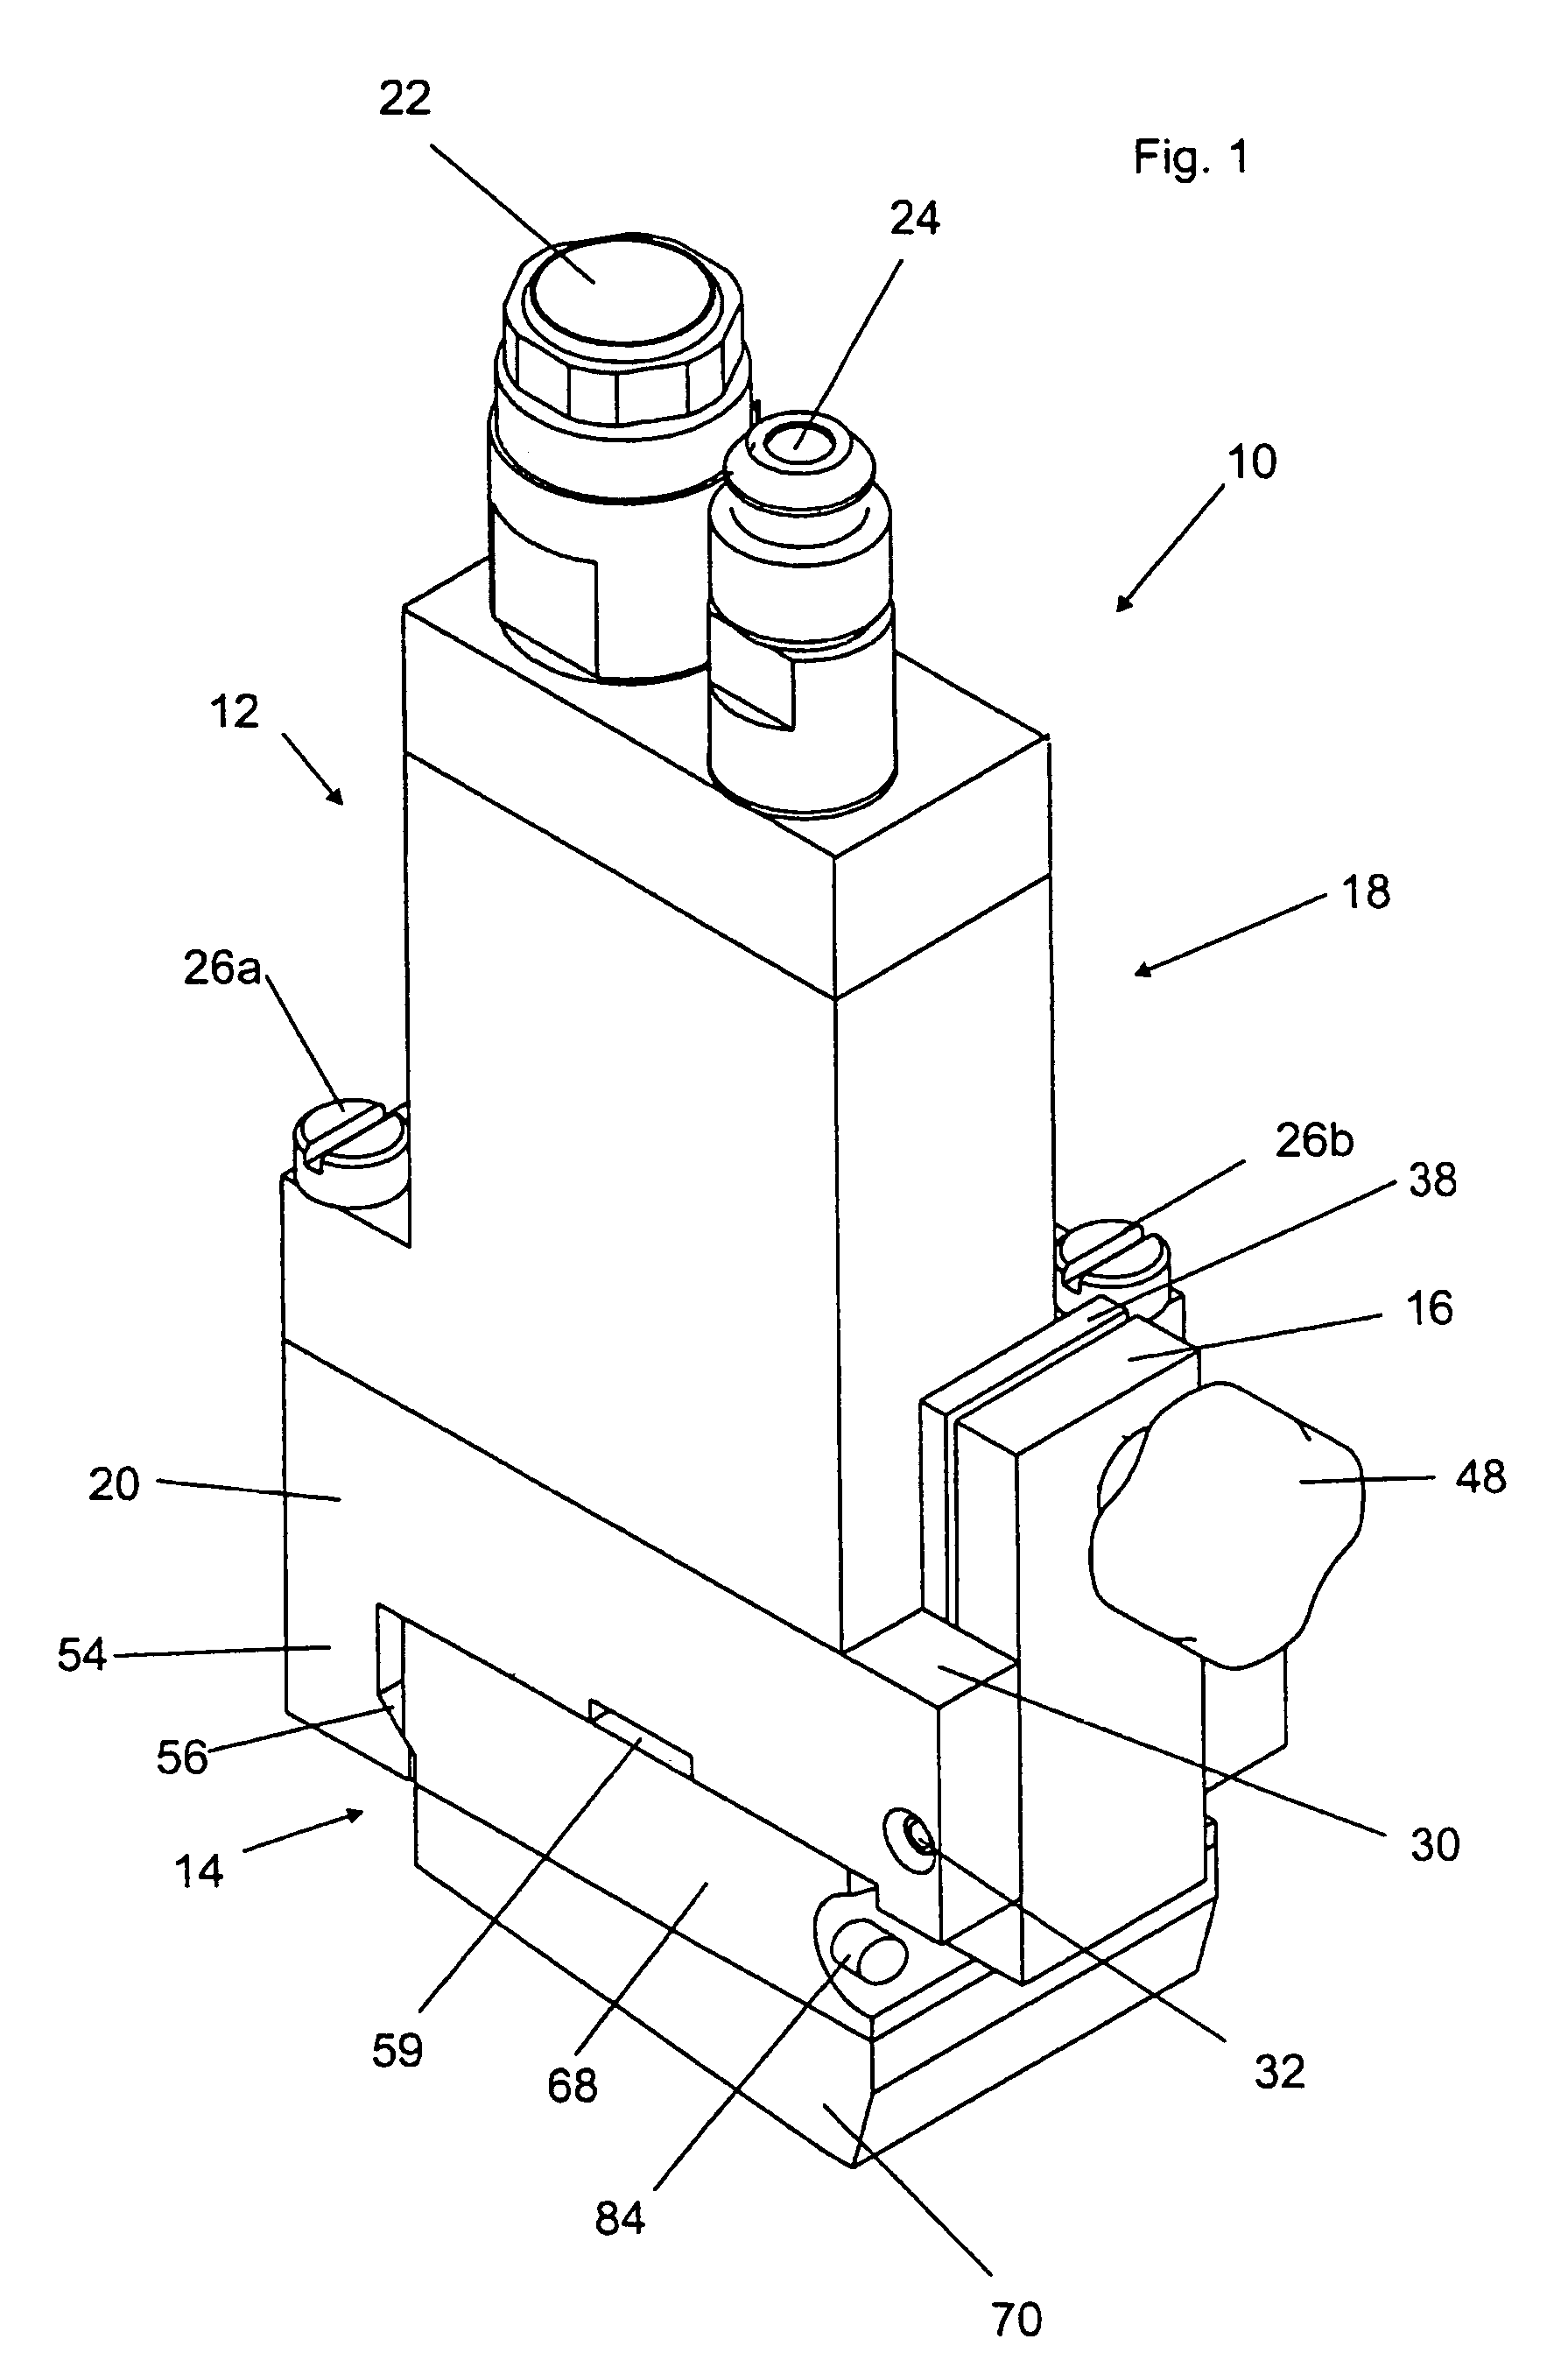 Apparatus for applying fluid to a substrate